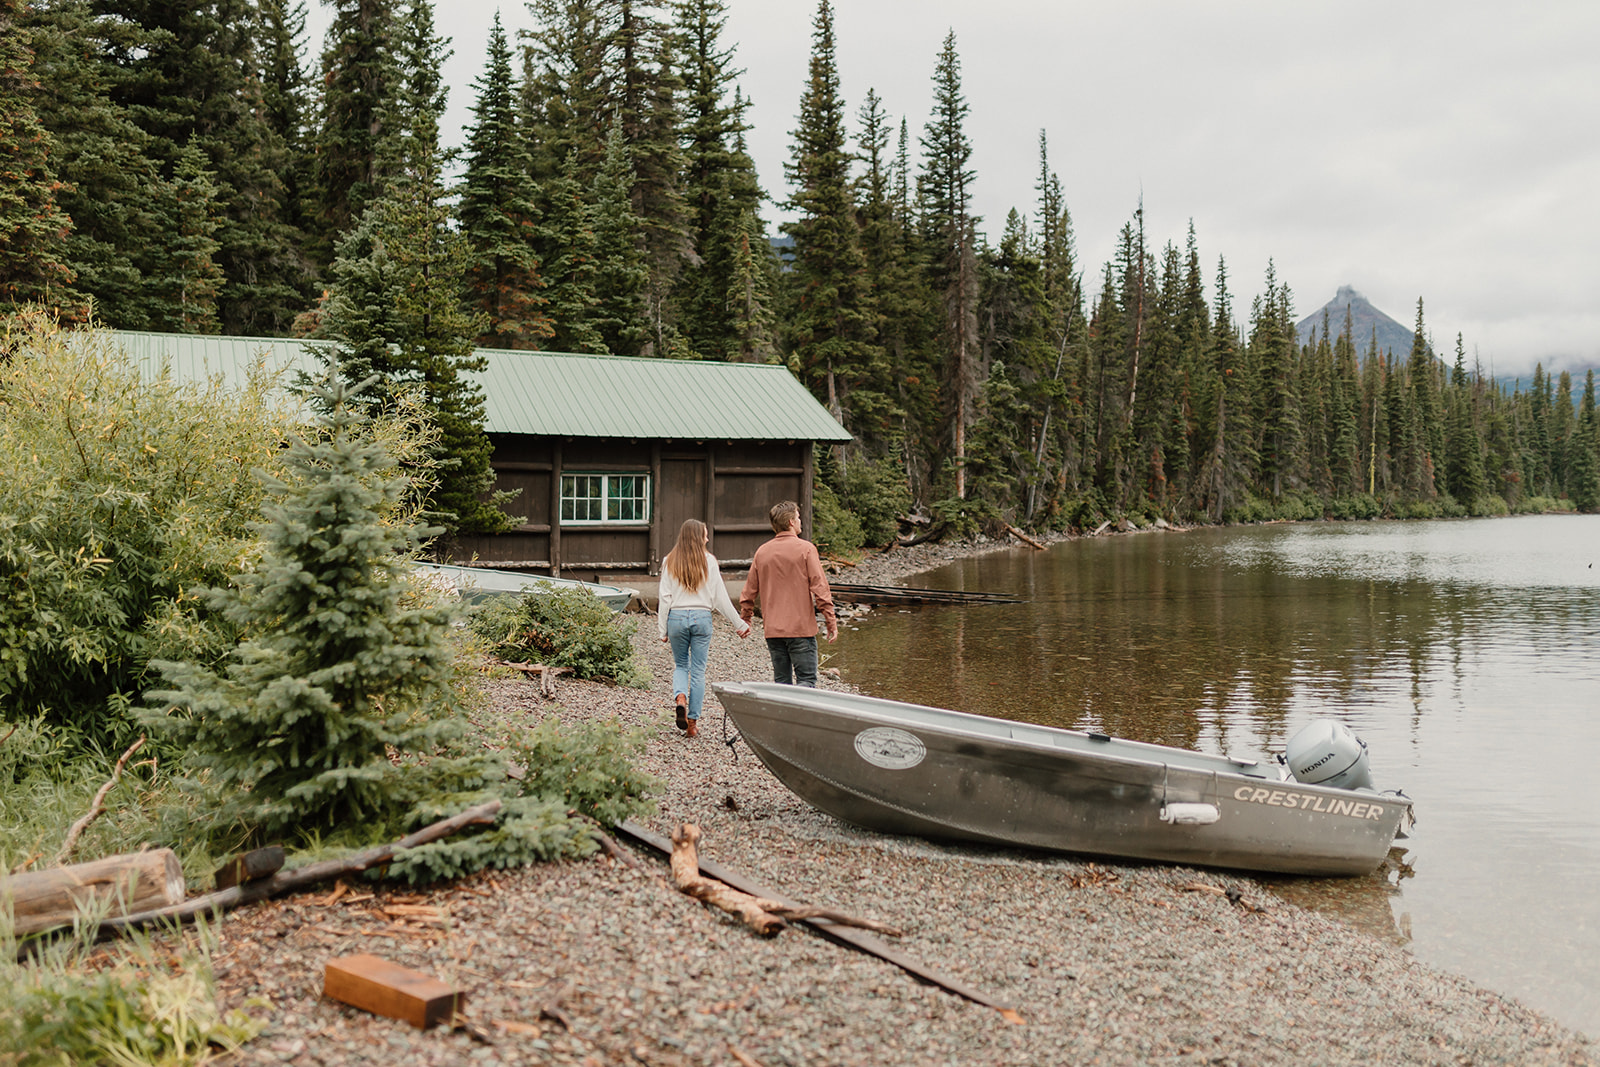 A rainy adventure couples photography session in Glacier National Park